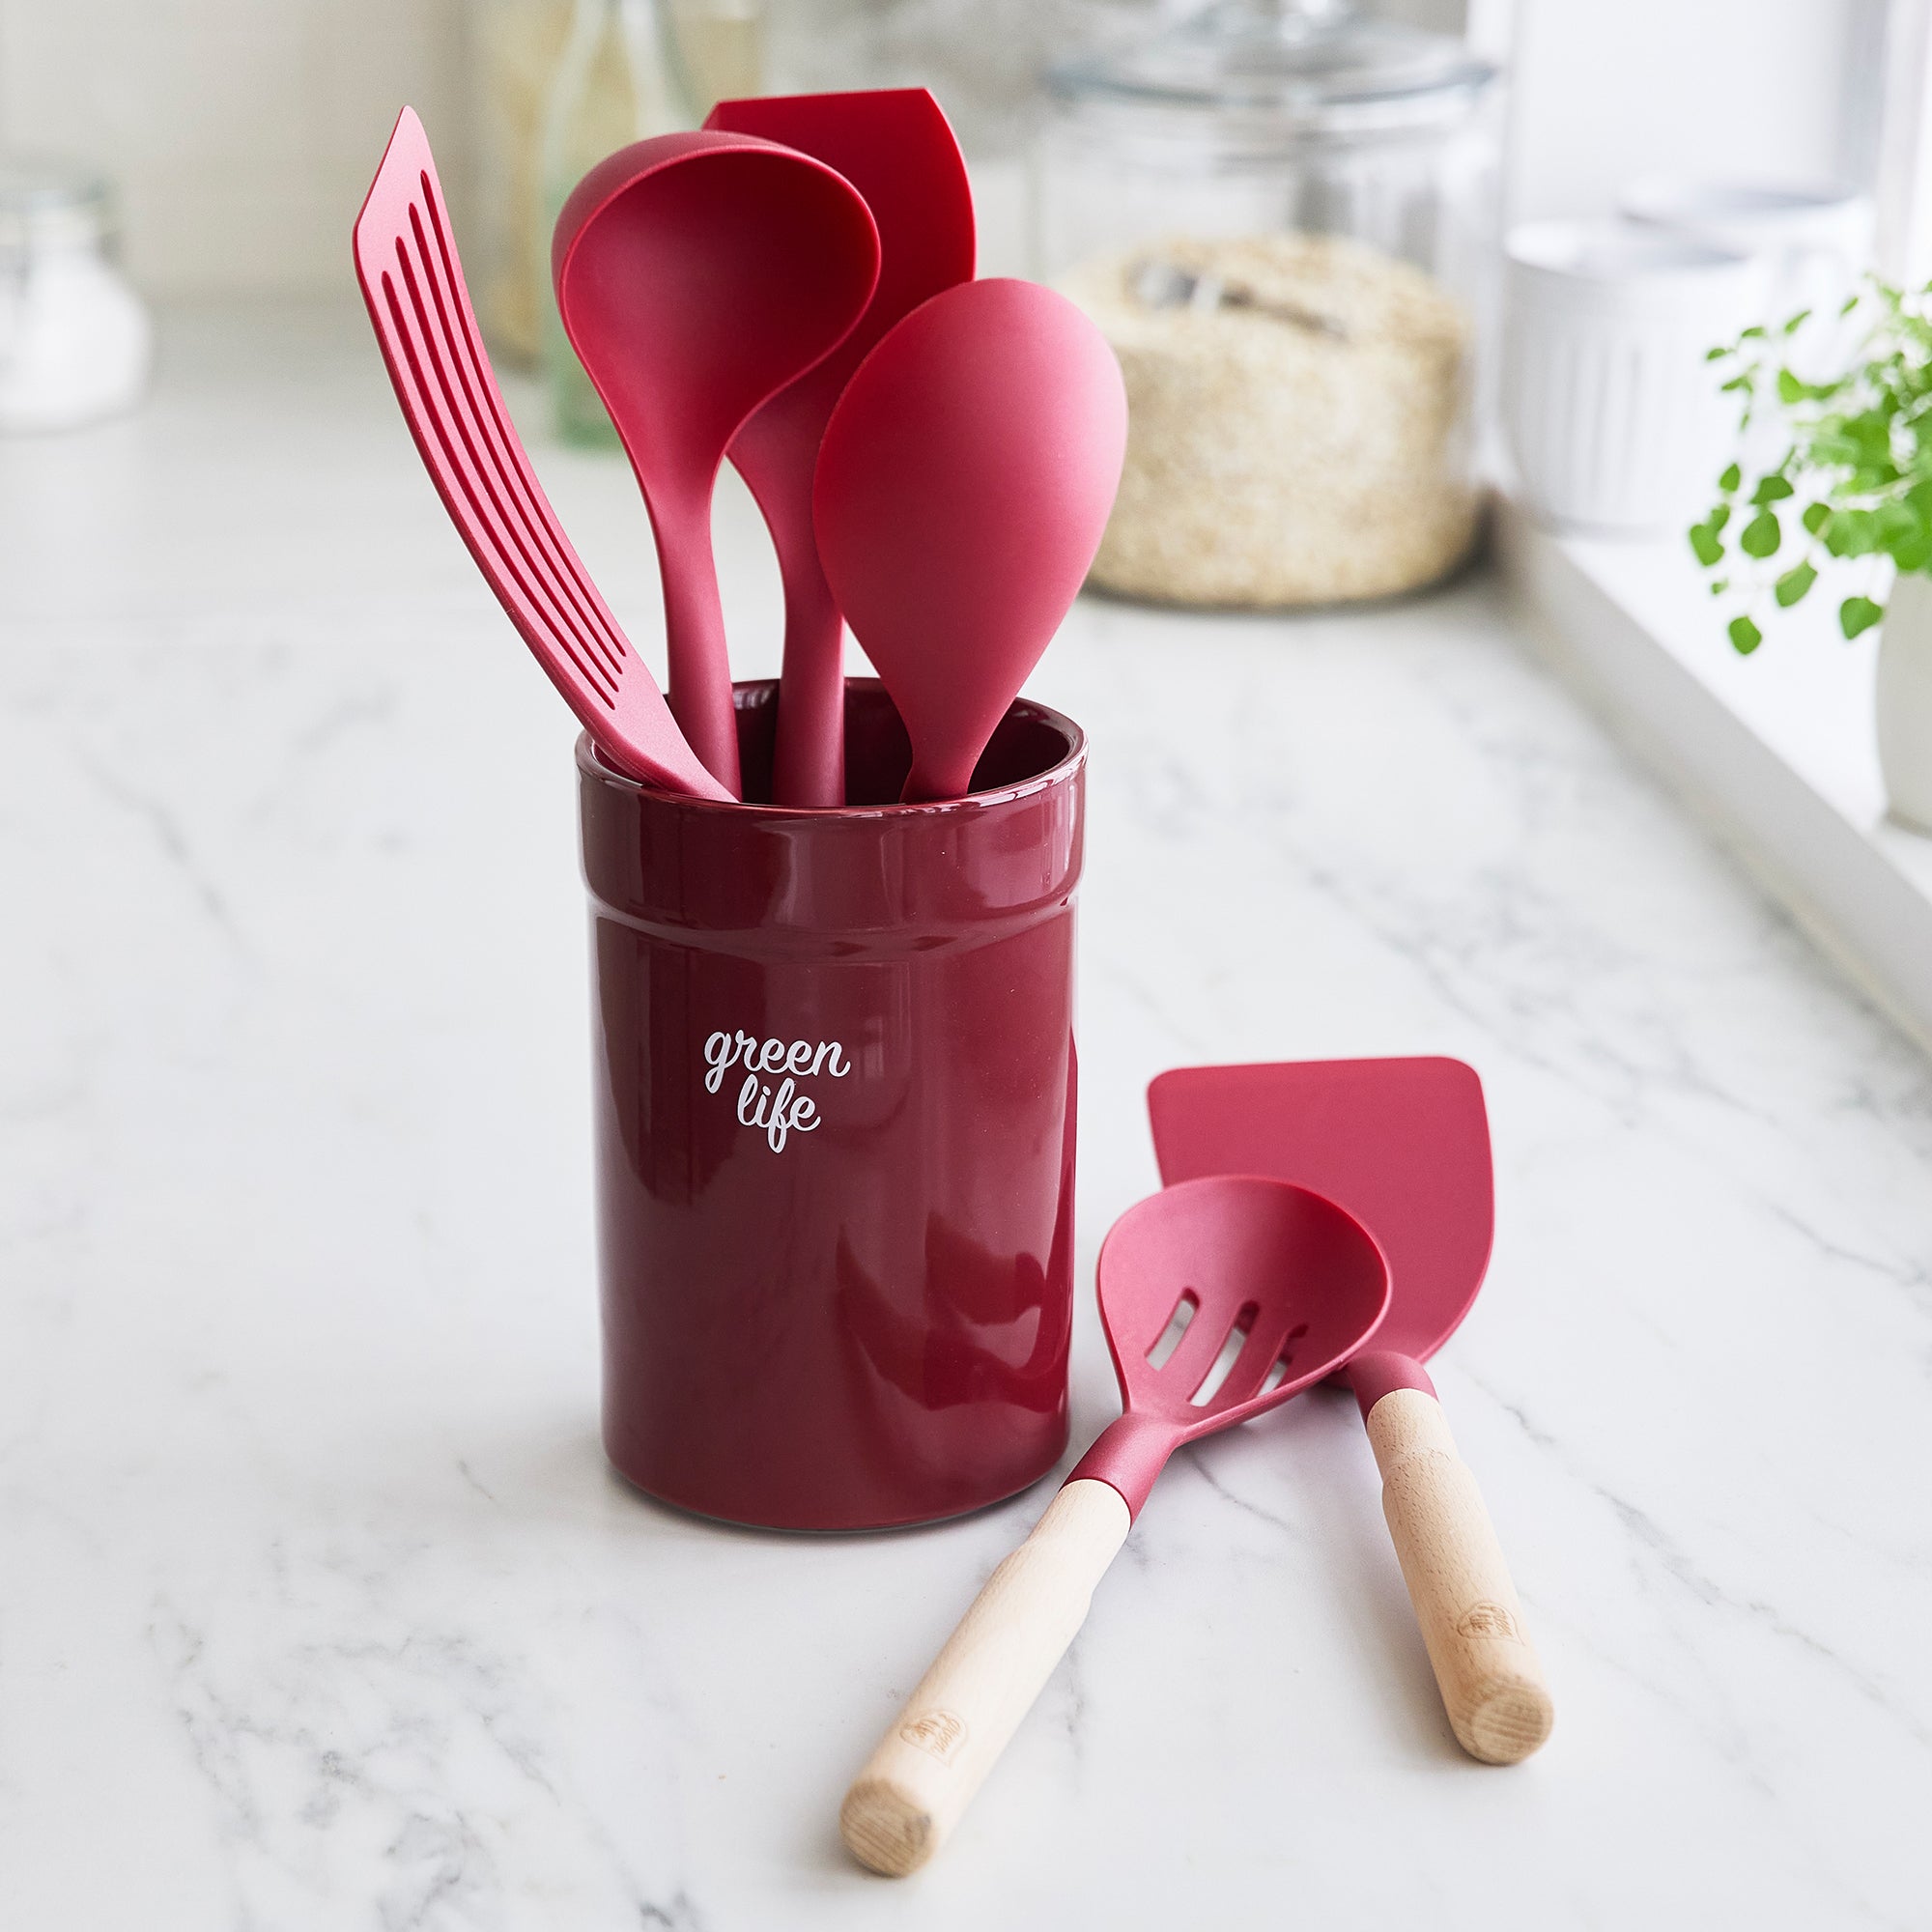 GreenLife Nylon & Wood Cooking Utensils with Ceramic Crock, 7-Piece Set | Red